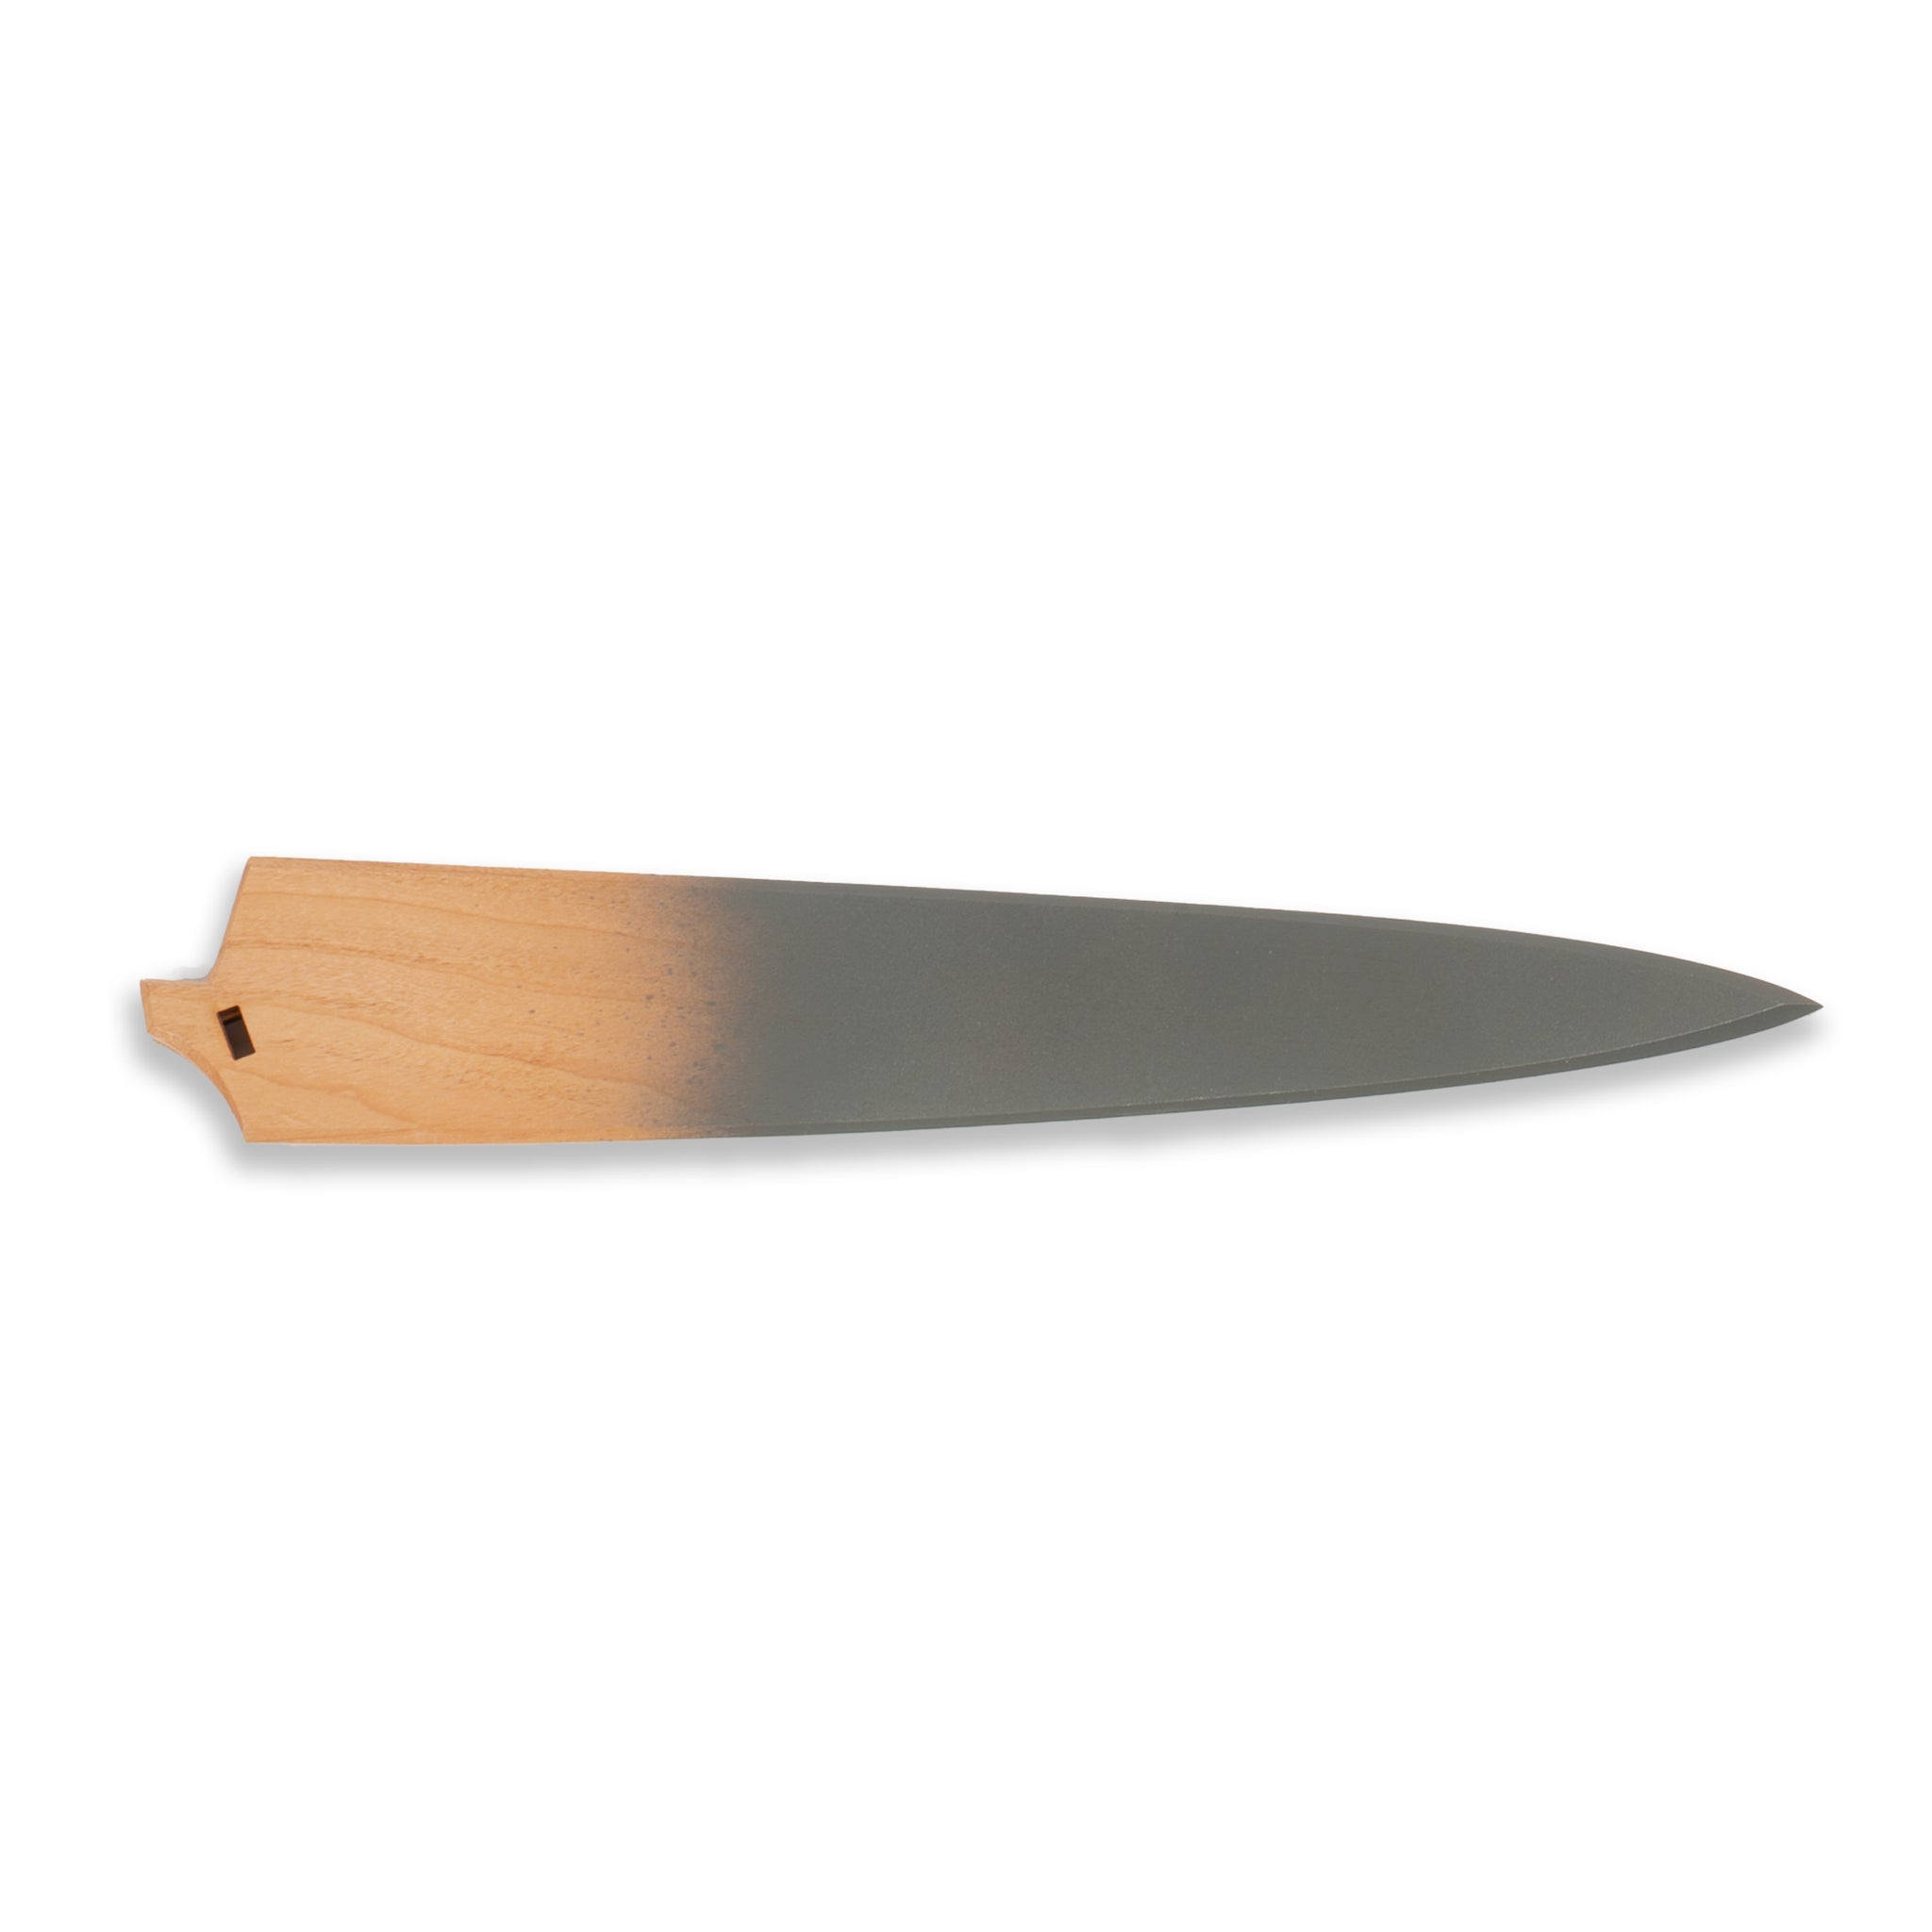 Cherry wood and gray saya knife cover for Town Cutler eXo Blue 10" Slicer Knife.